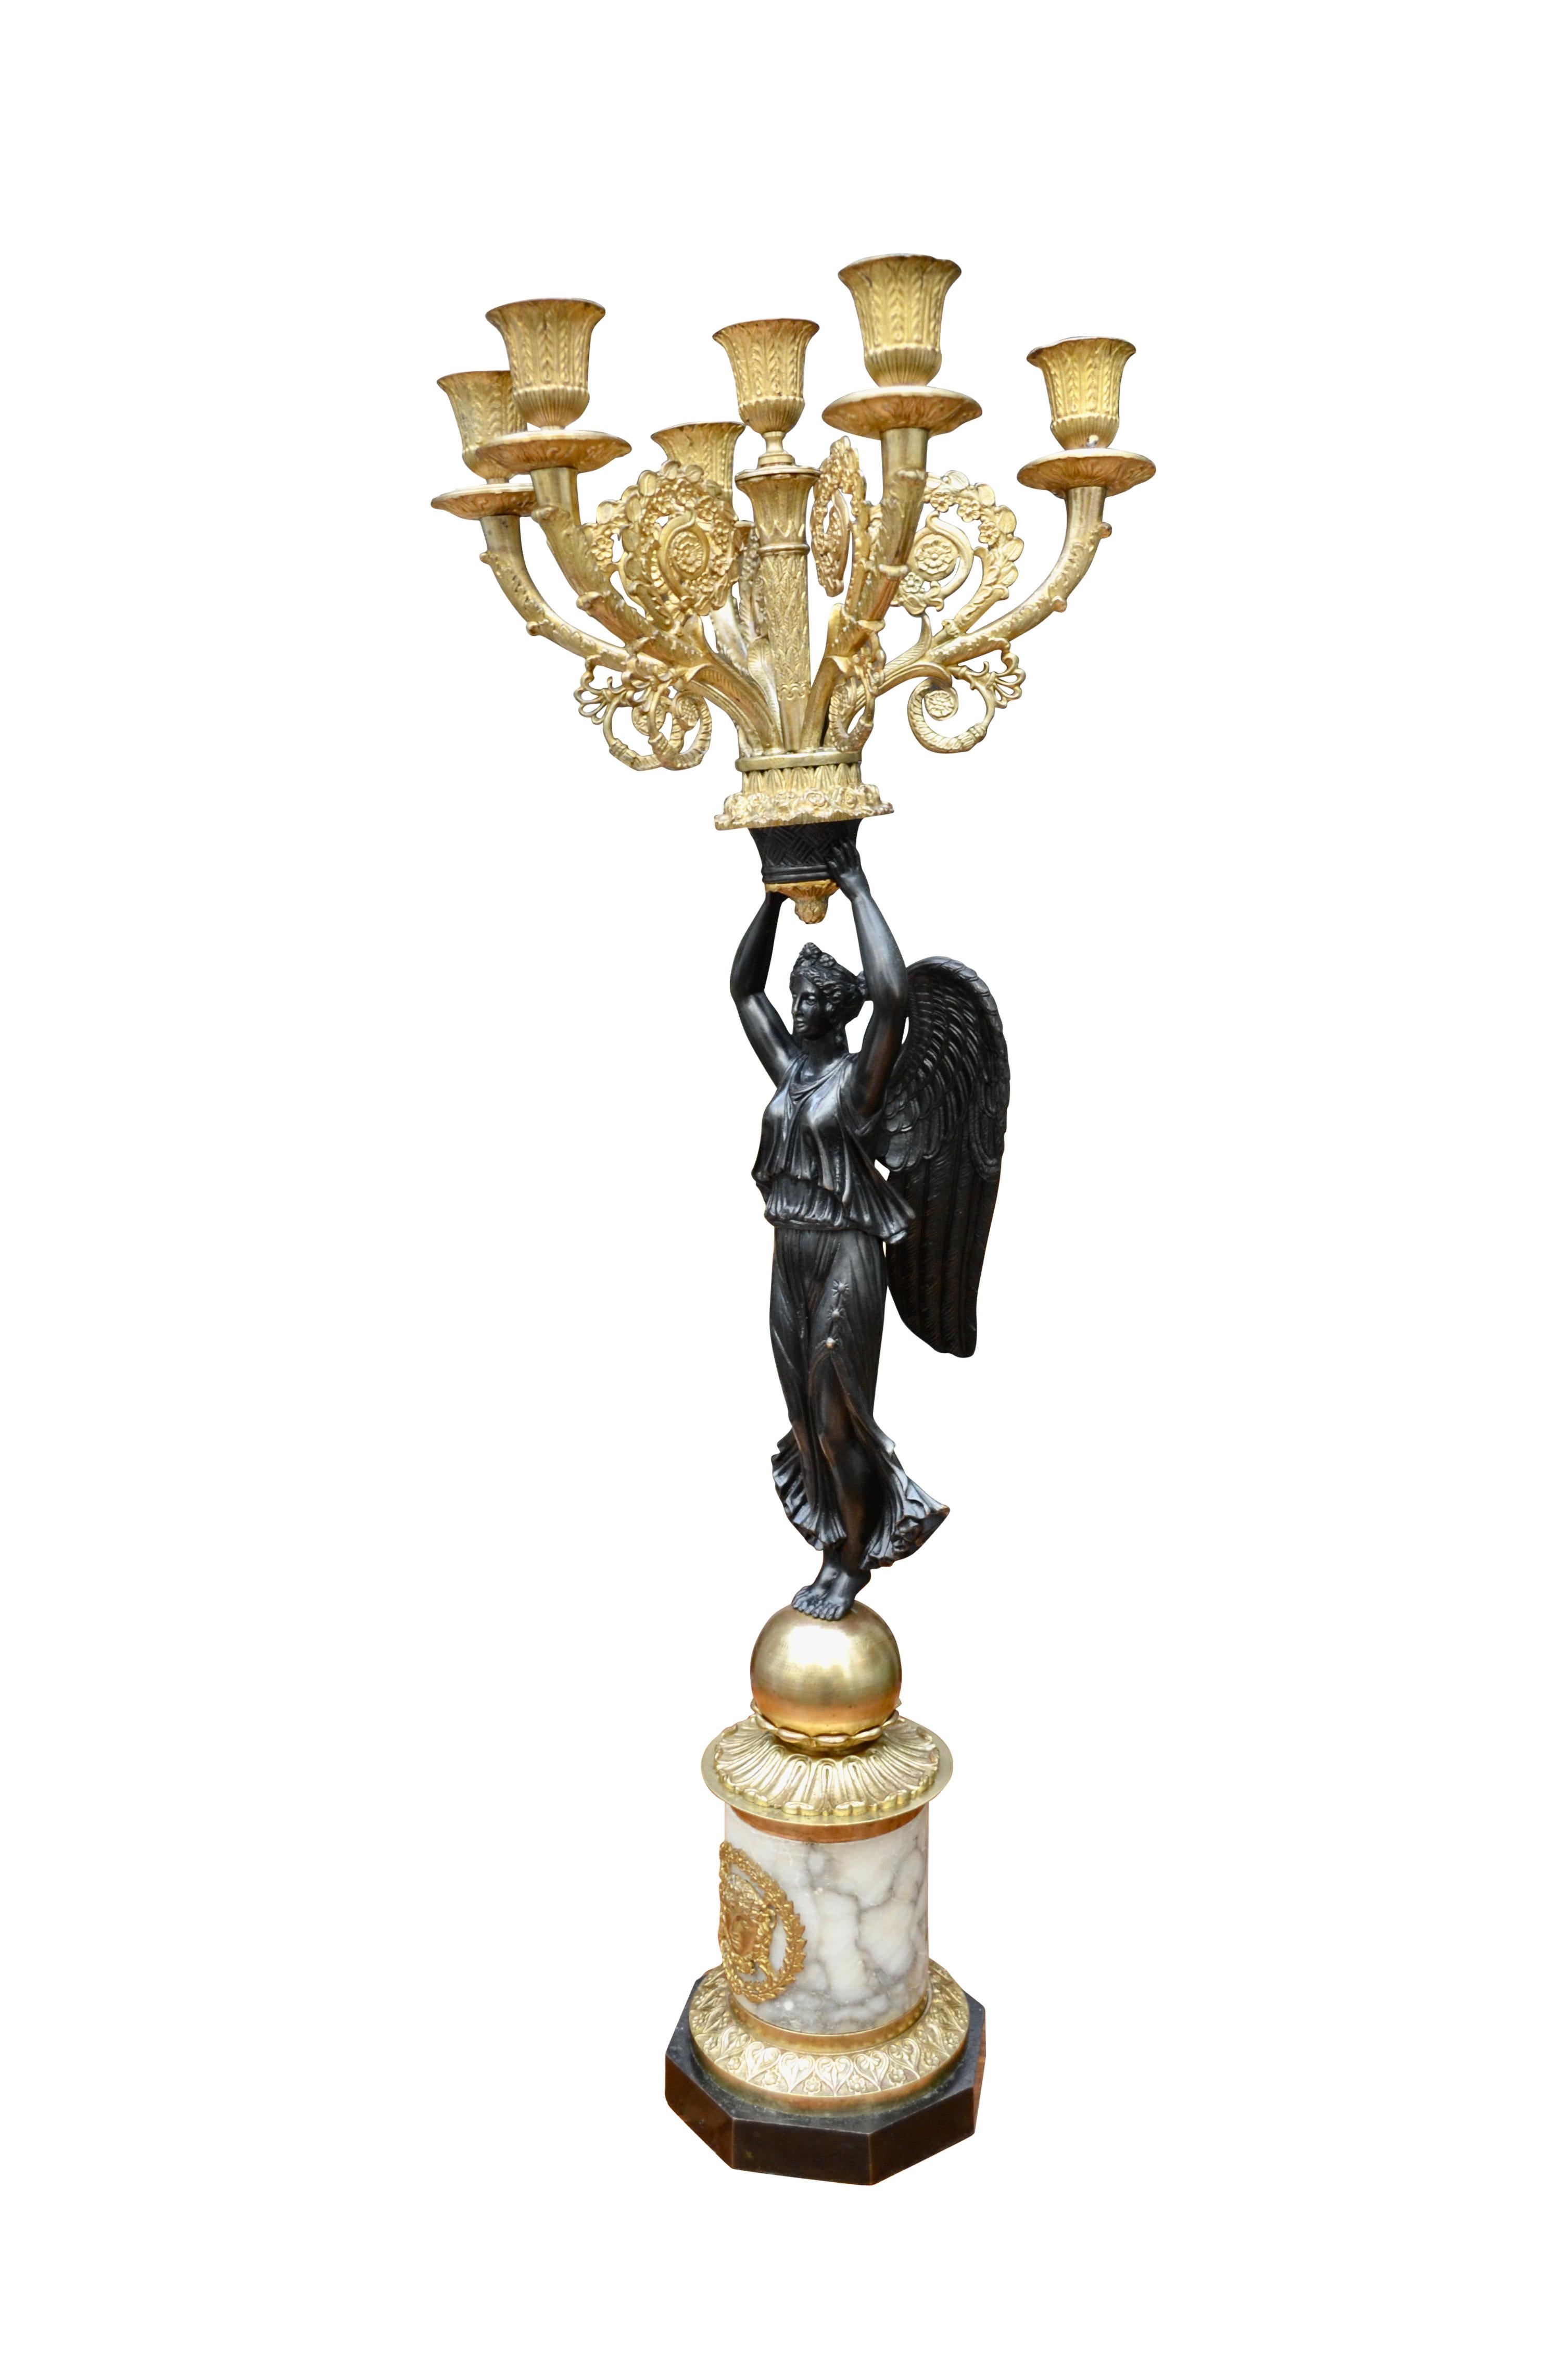 Single French Empire Style Patinated  and Gilt Bronze Winged Victory Candelabra For Sale 10